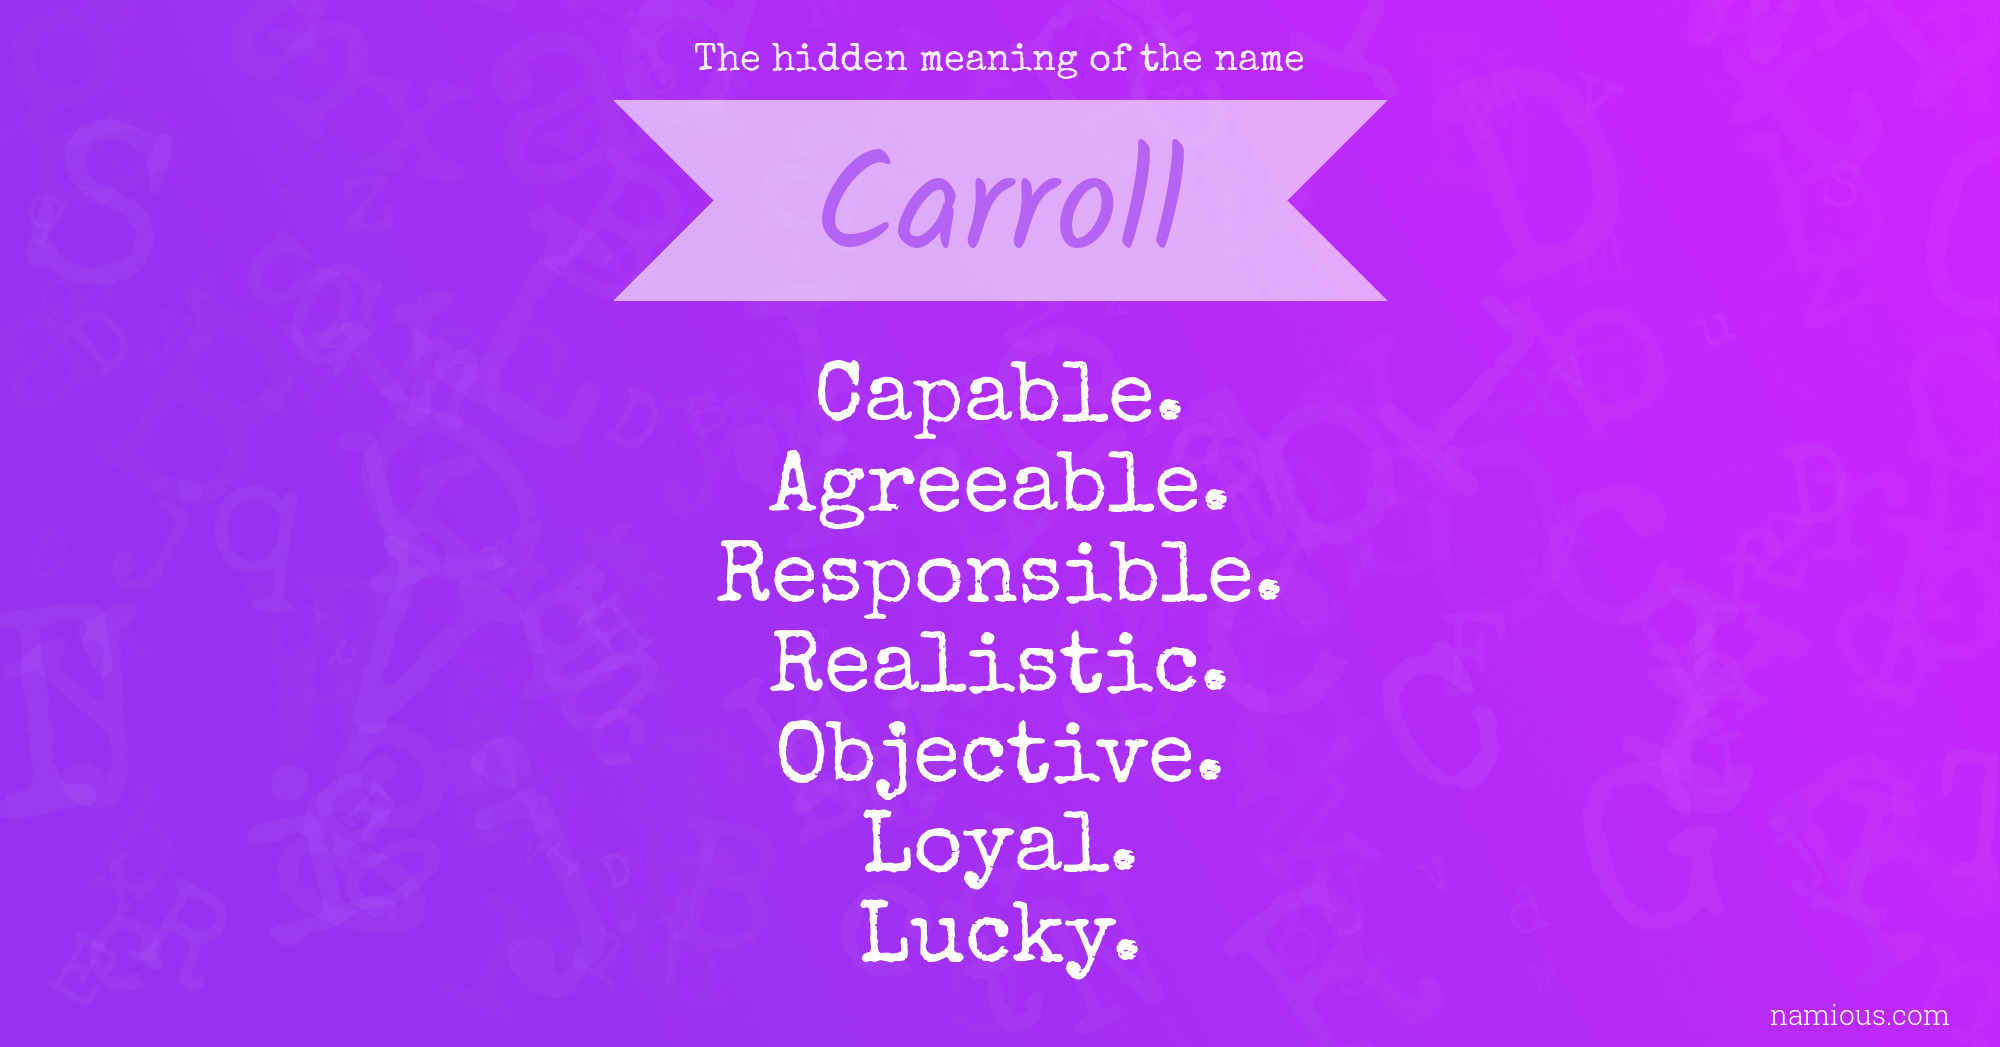 The hidden meaning of the name Carroll